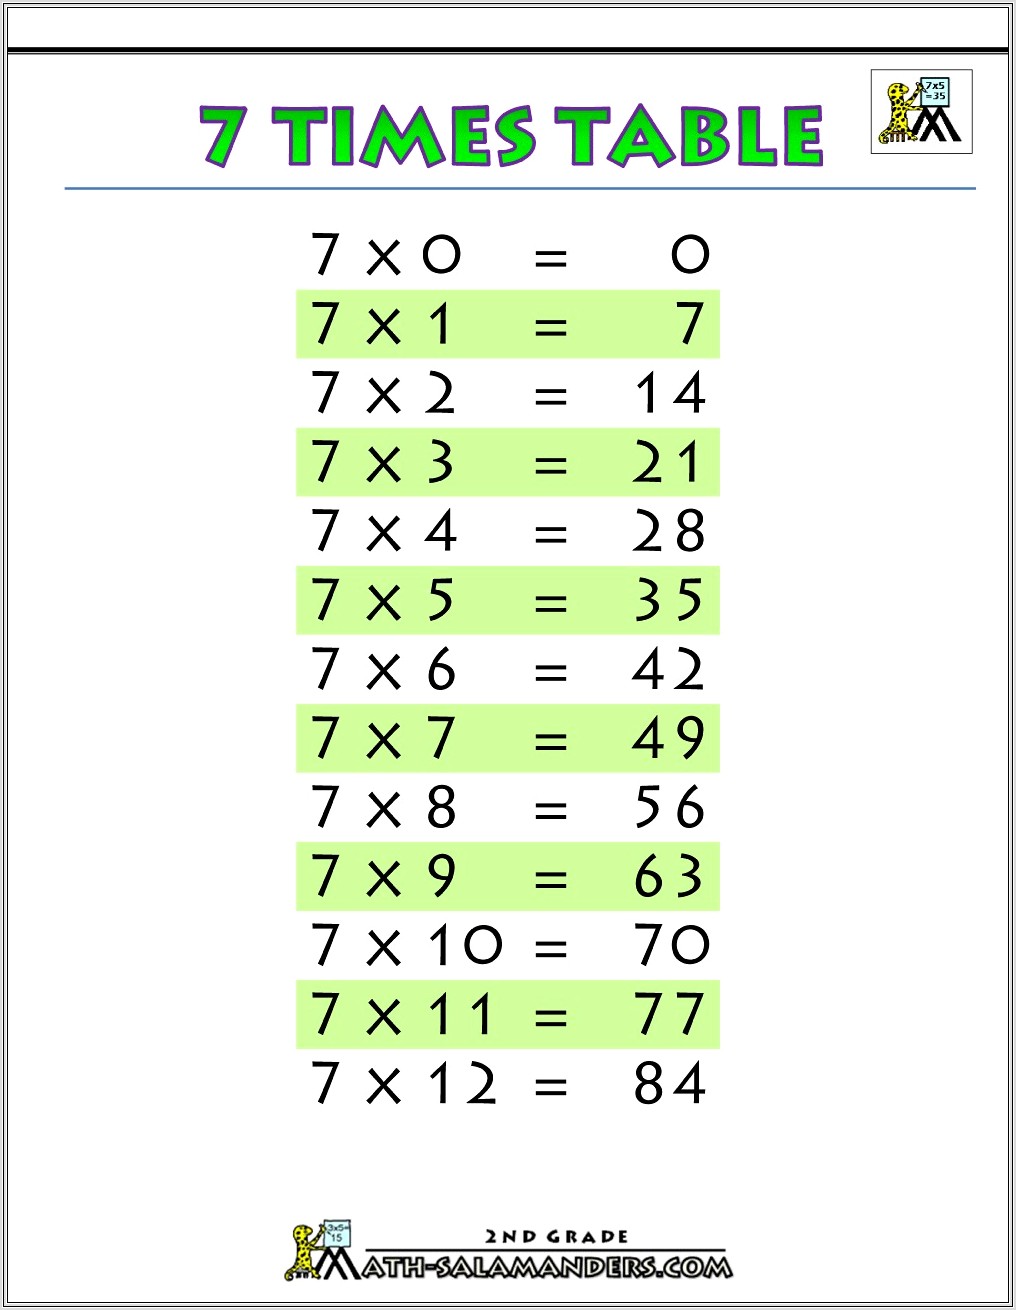 7 Times Table Worksheet With Answers